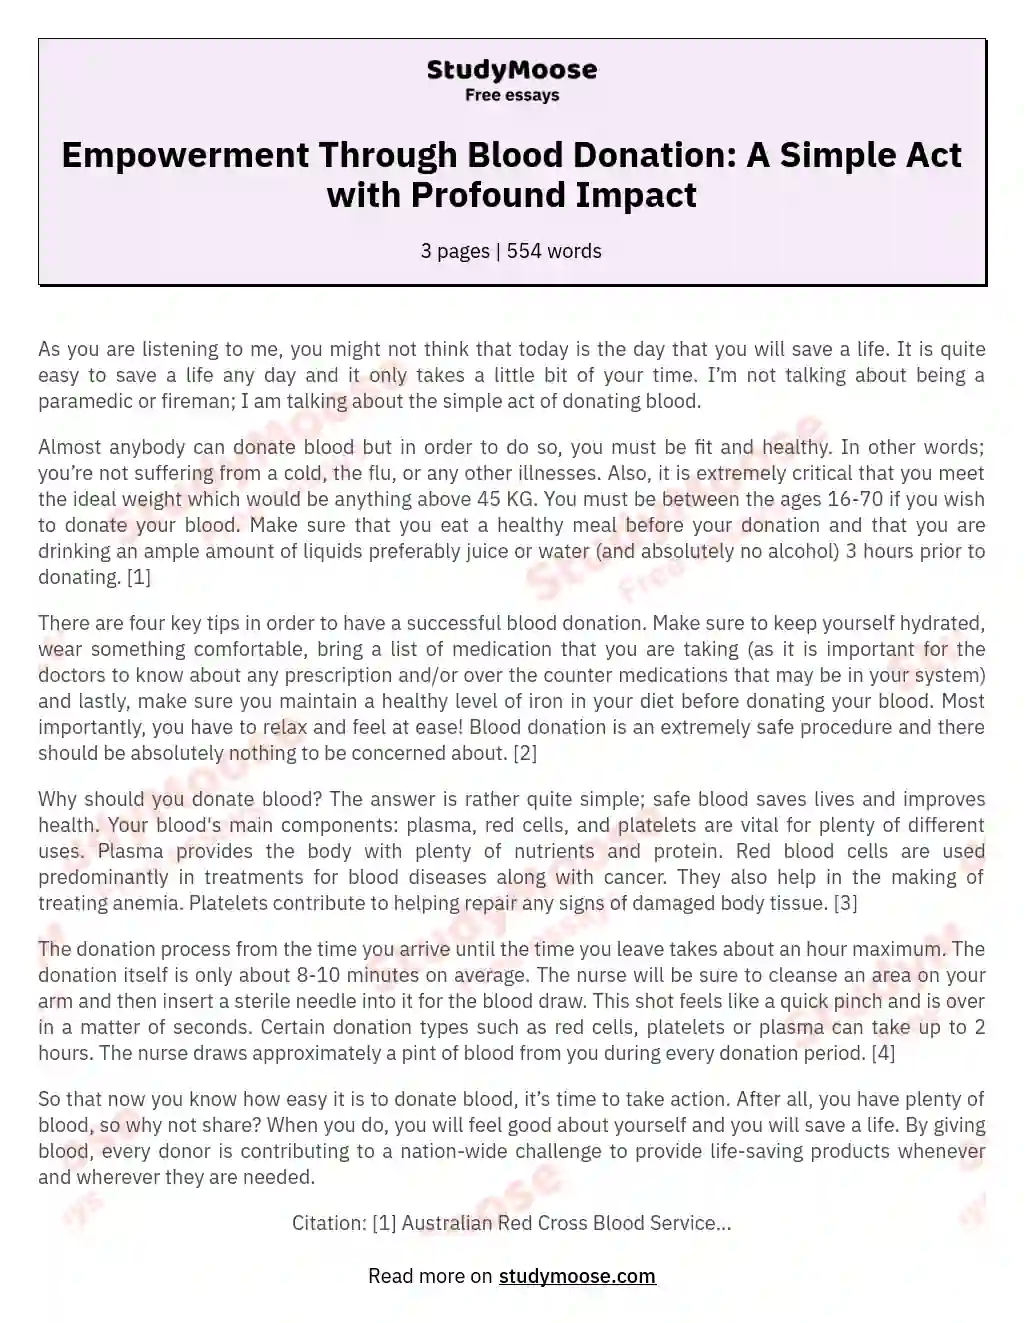 Empowerment Through Blood Donation: A Simple Act with Profound Impact essay